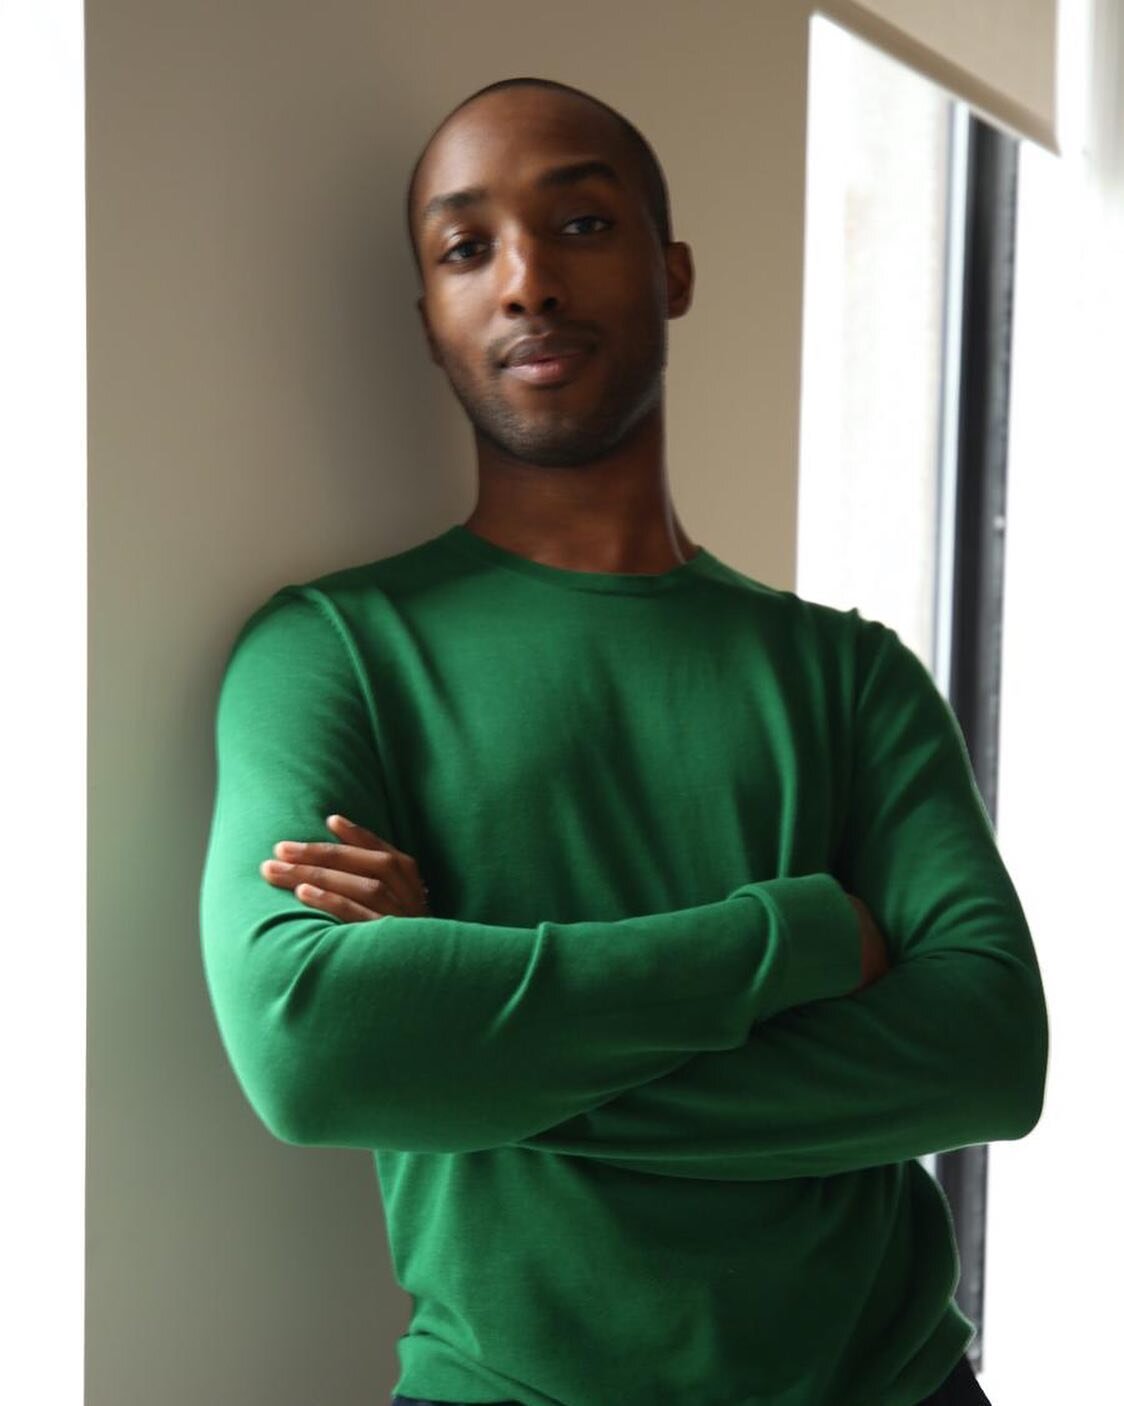 Congratulations to Asad Syrket, the new Editor-in-Chief of Elle Decor as of September 14th...loving this inspired new direction for the magazine and the shade of green of that sweater is just dynamite...👏💚👏💚 @as4d @elledecor @stellenevolandes #in